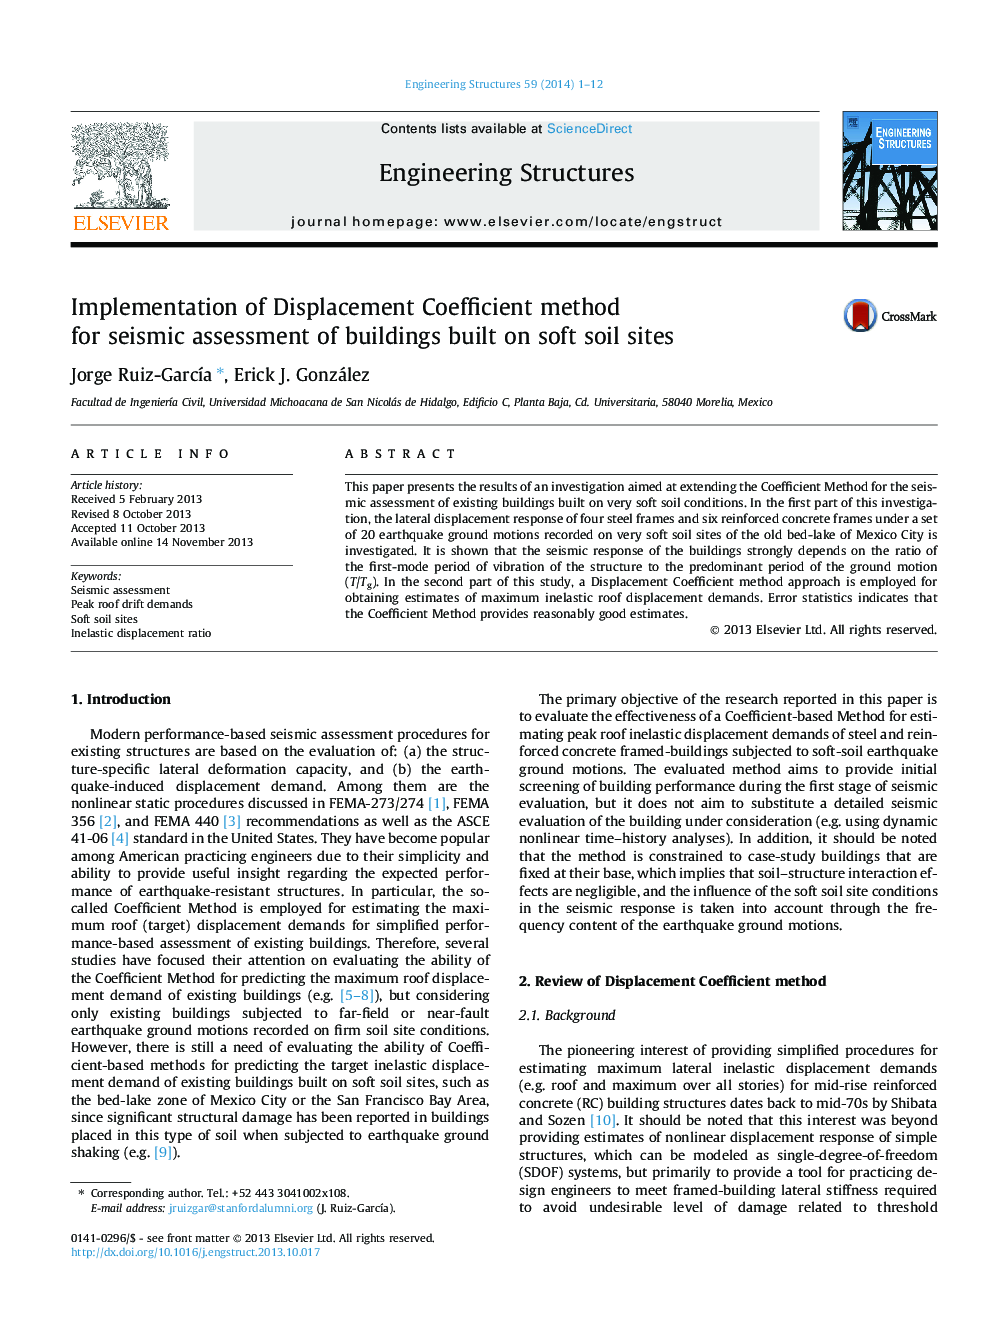 Implementation of Displacement Coefficient method for seismic assessment of buildings built on soft soil sites